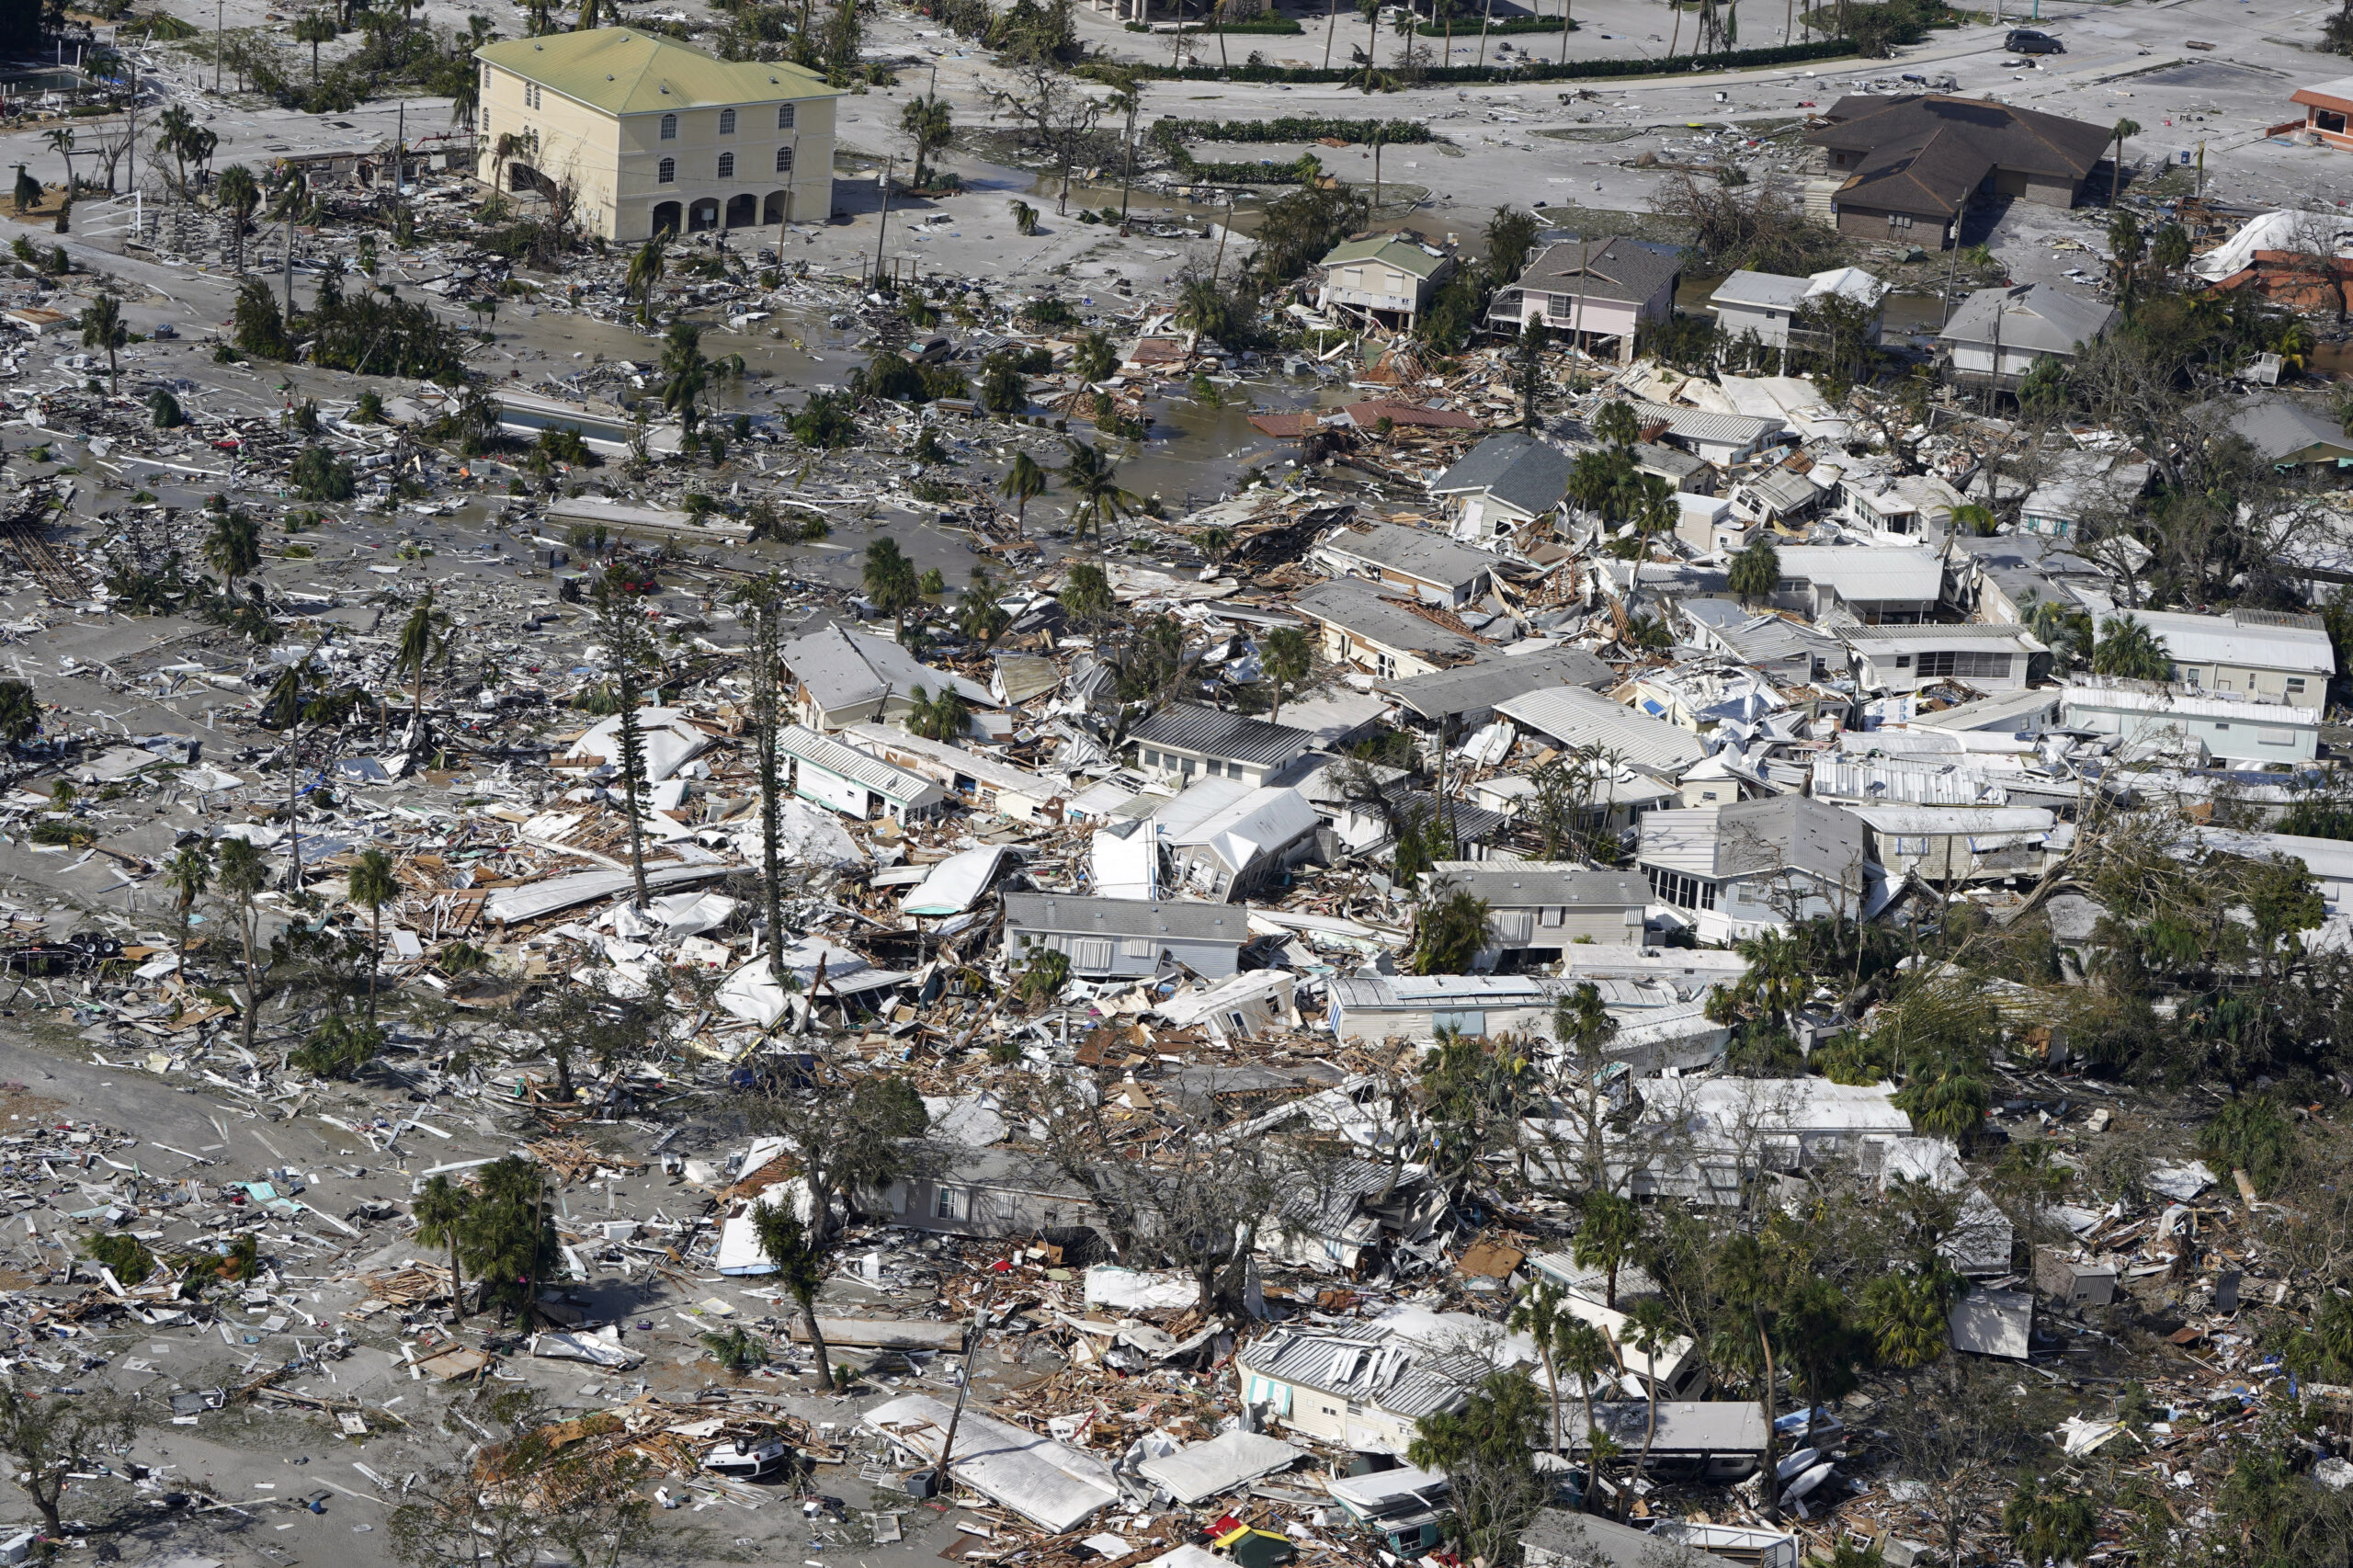 Photos: This is what Florida looks like after Hurricane Ian